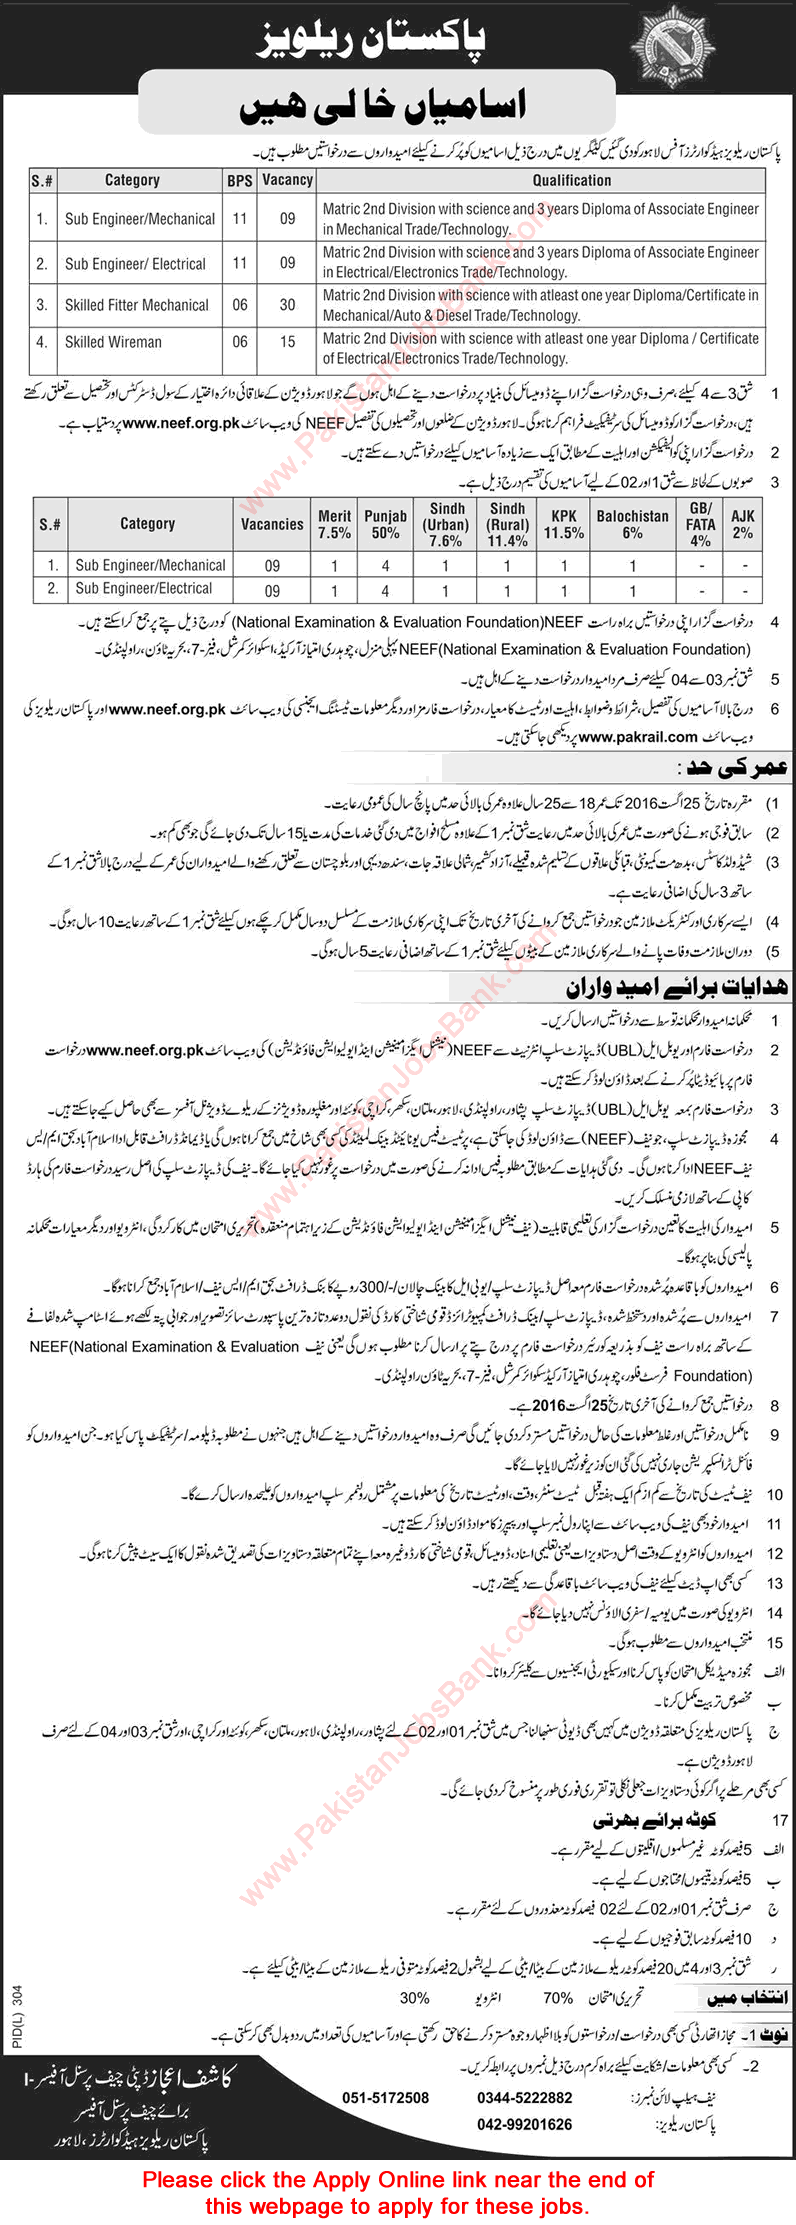 Pakistan Railways Jobs August 2016 Lahore NEEF Online Application Form Sub Engineers, Skilled Fitters & Wiremen Latest